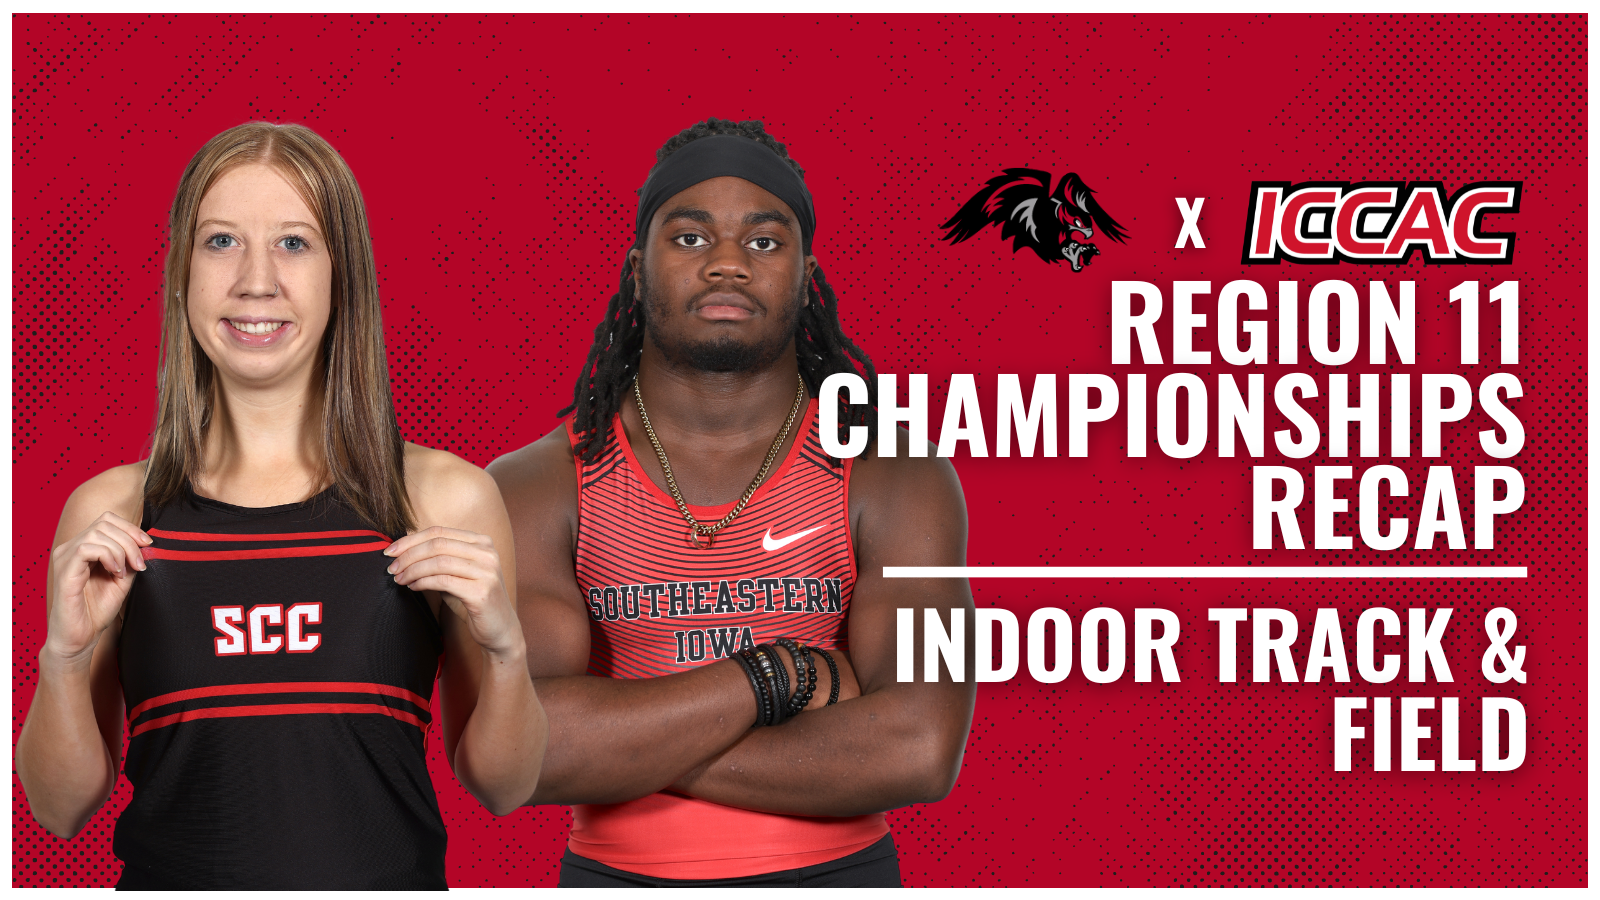 INDOOR TRACK AND FIELD COMPETES AT REGION 11 INDOOR CHAMPIONSHIPS, SENDS 2 EVENTS TO NATIONALS